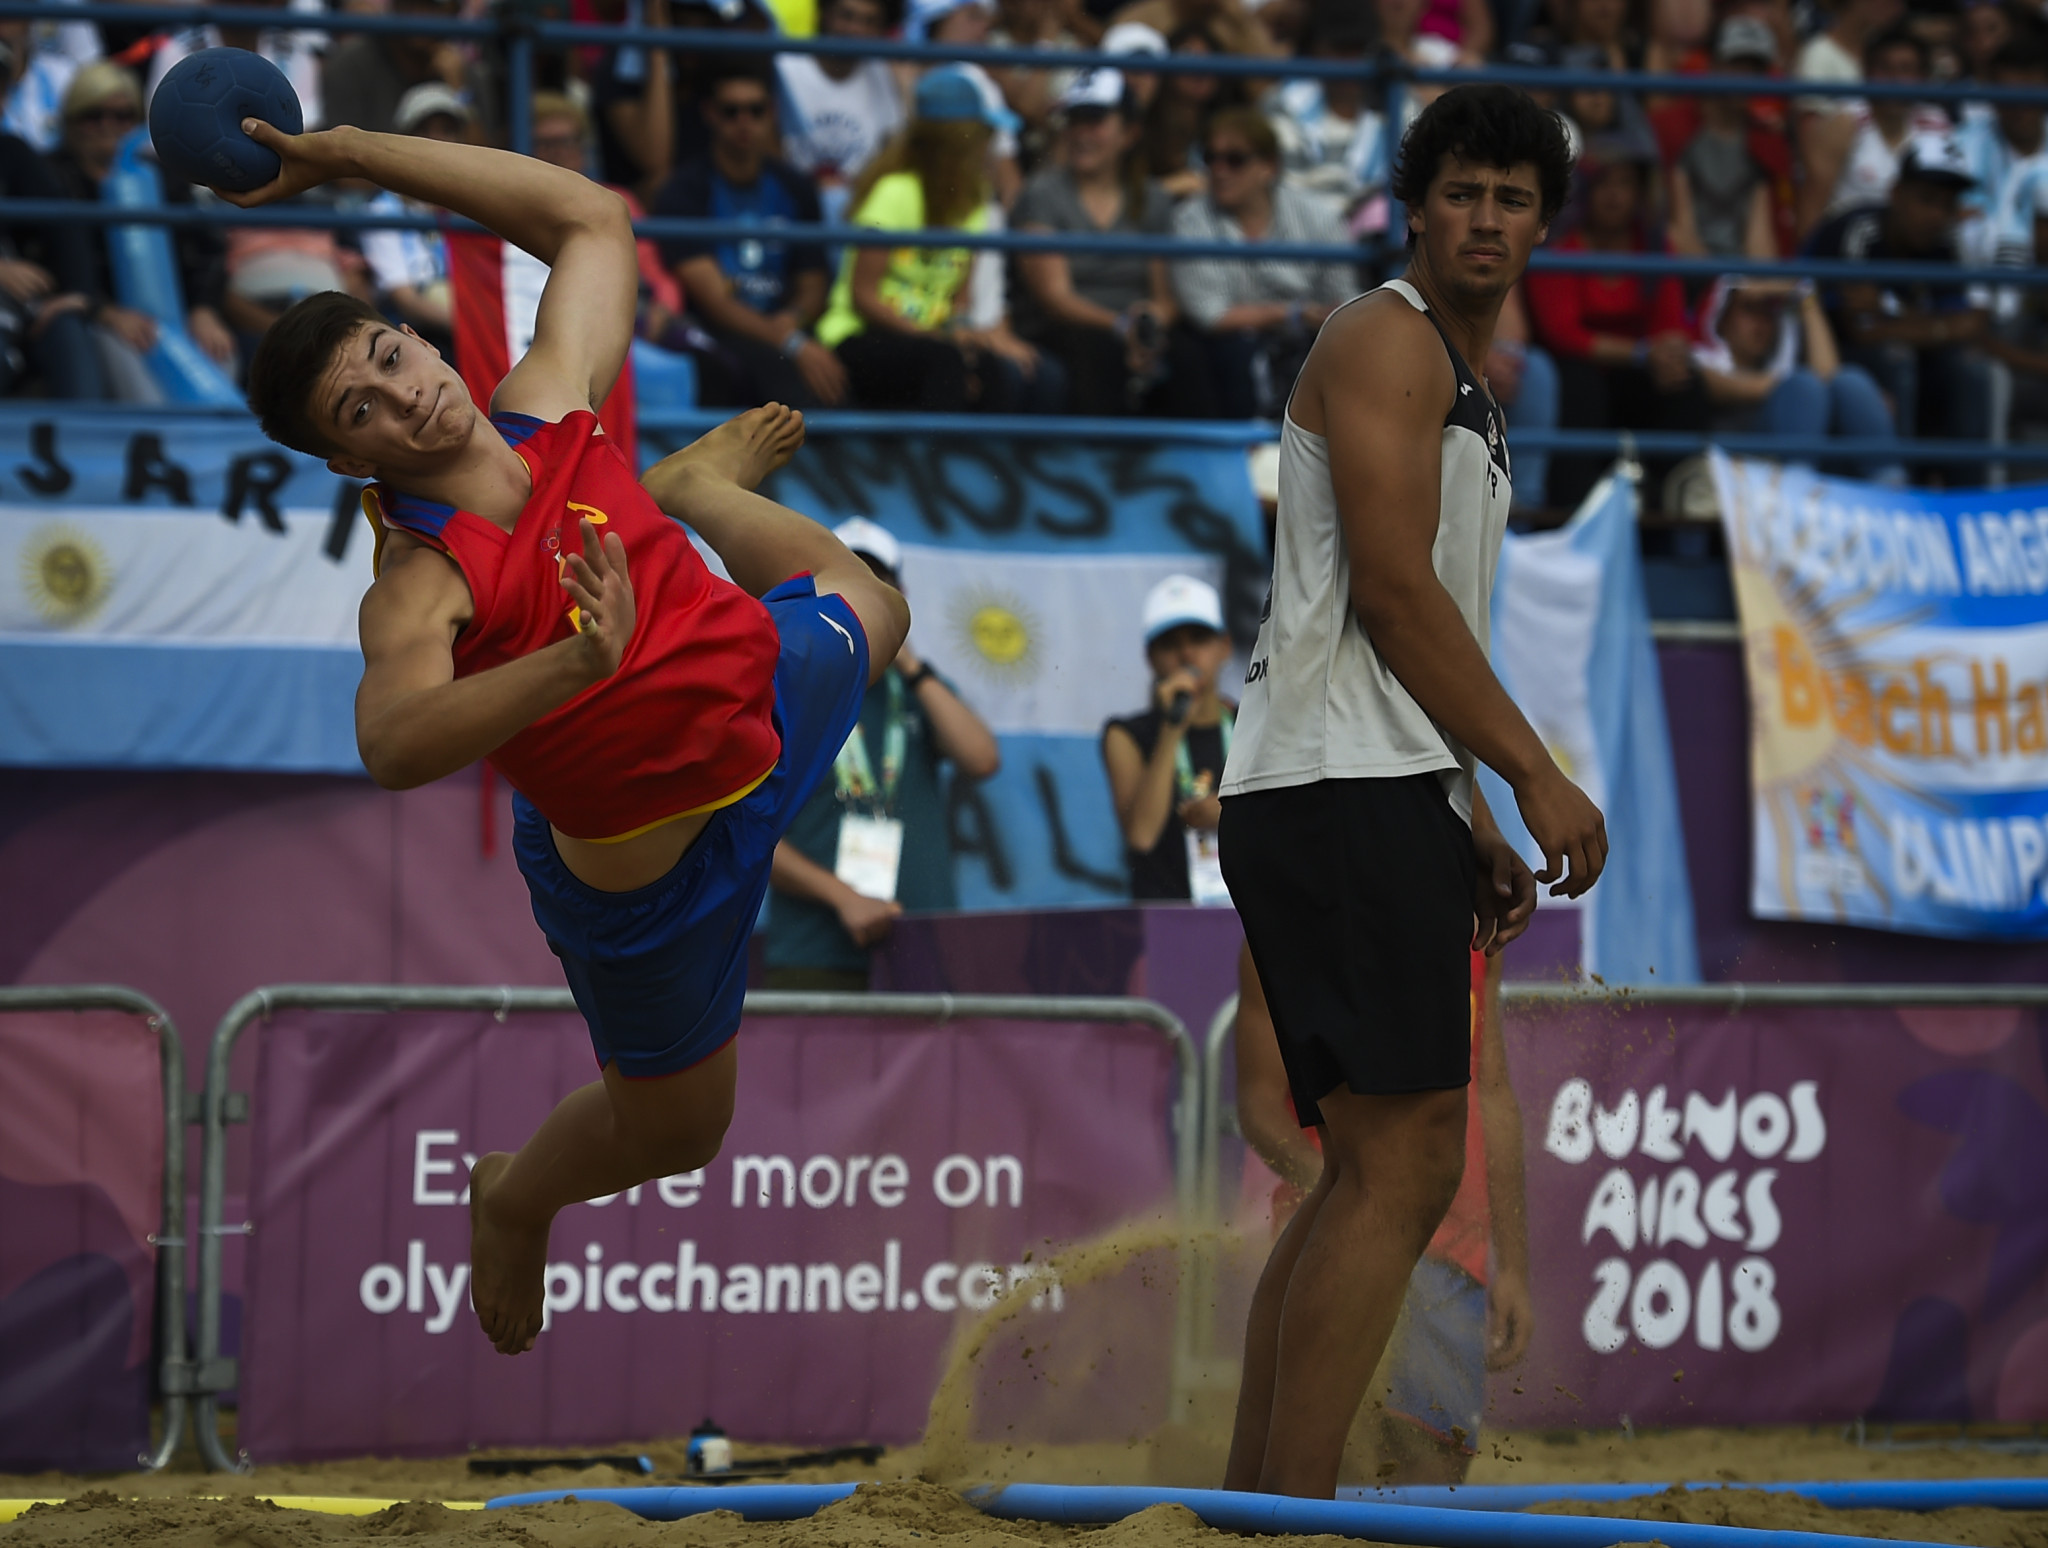 Spain clinched the men's beach handball crown by overcoming Portugal in a shootout ©Getty Images